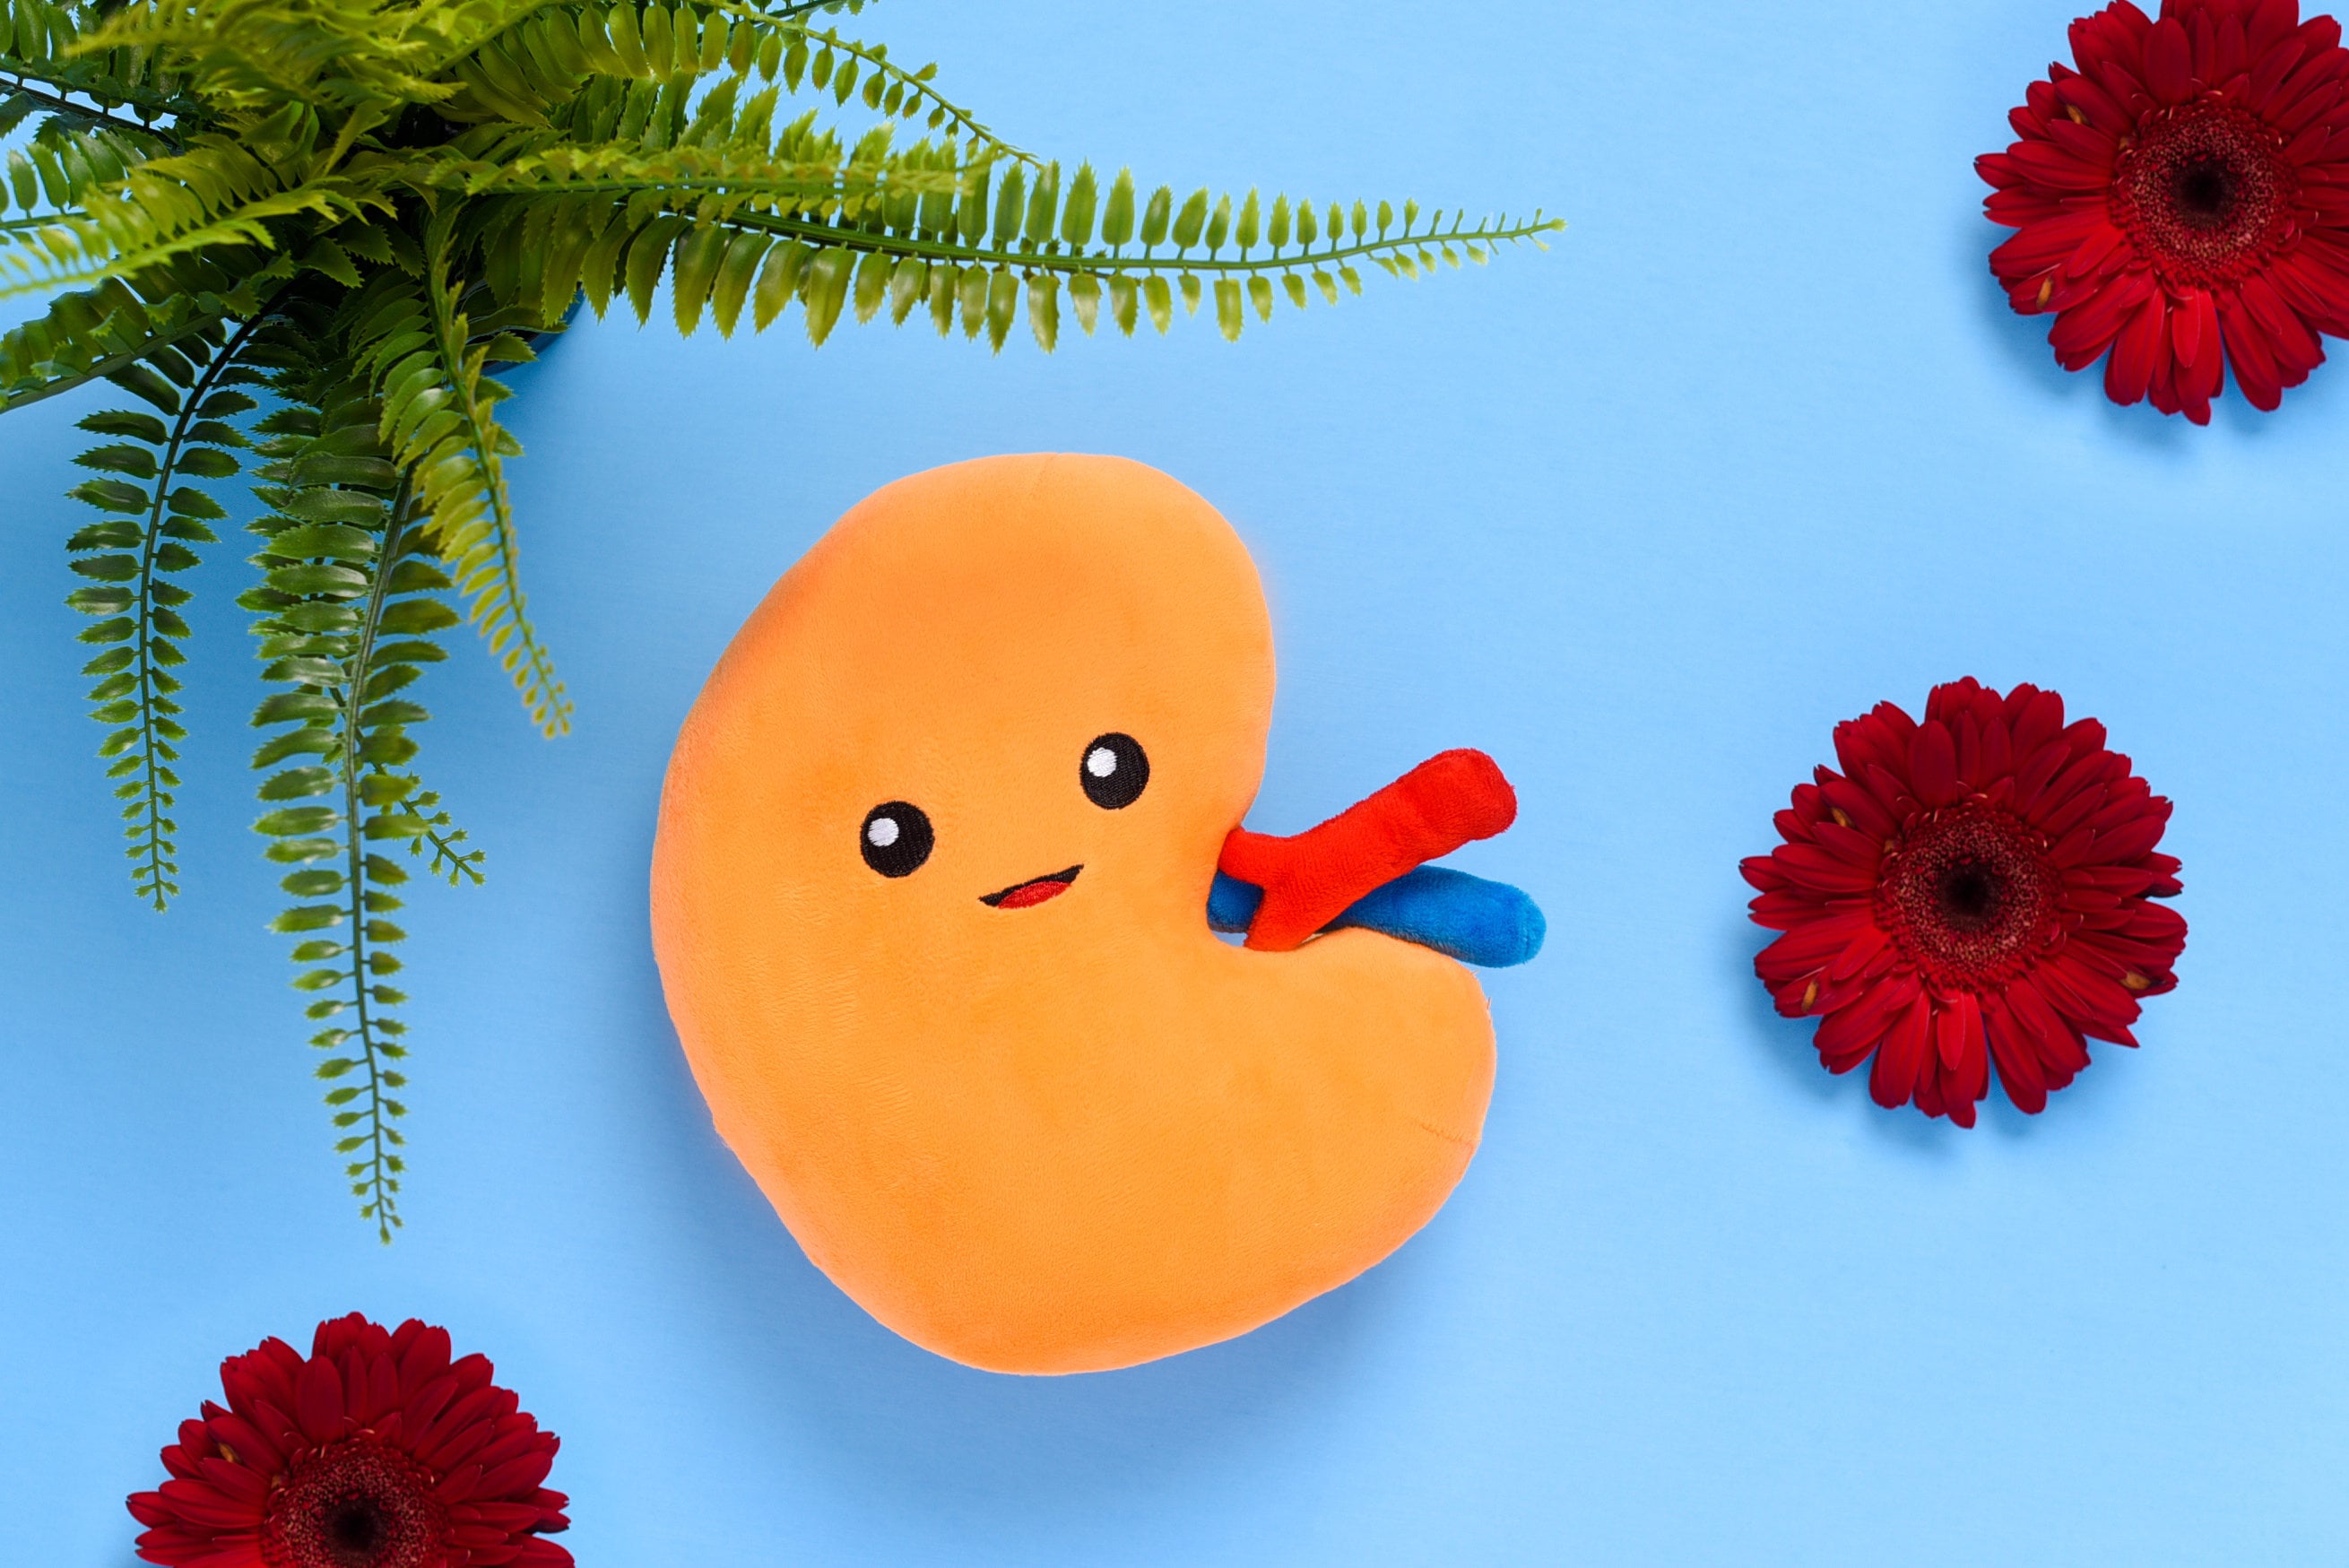 Kidney Slippers | Kidney Surgery Gift - Kidney Donor Funny Gift by I Heart Guts